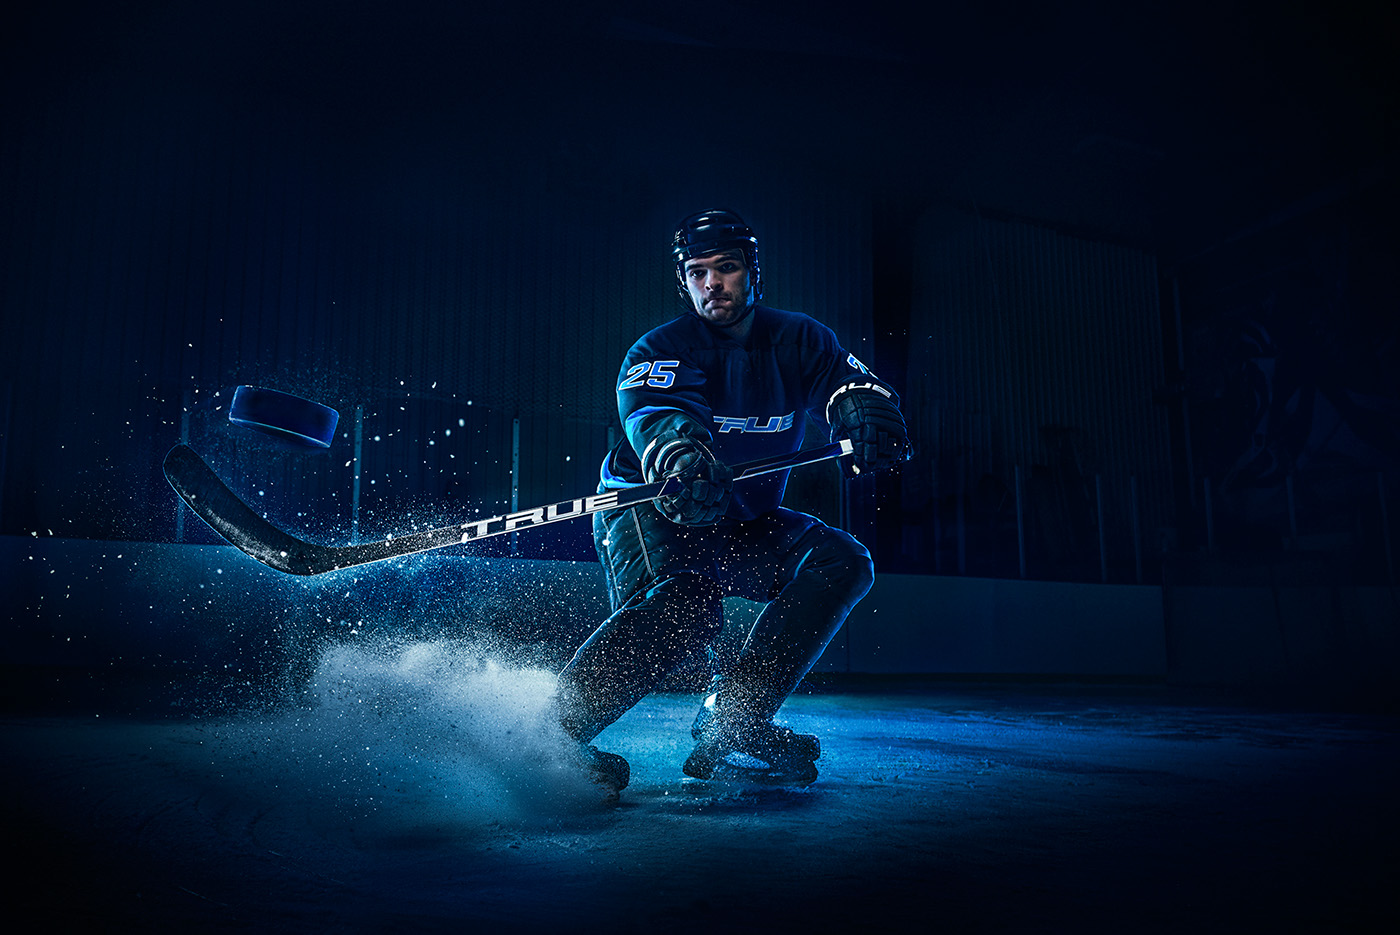 hockey,ice,player,sport,action,Highspeed,cold,winter,Canada,puck,stick,Gear...